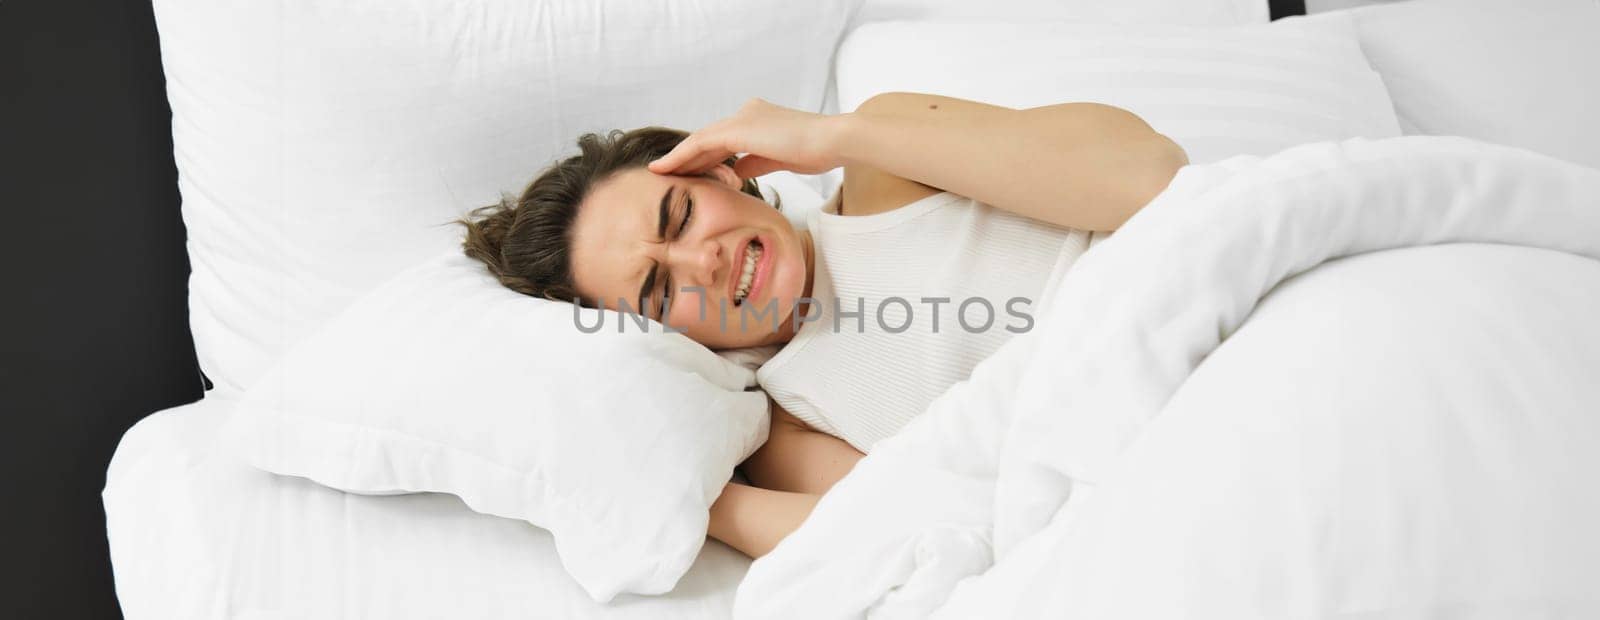 Close up portrait of female model, lying in bed with headache, grimacing and frowning from painful migraine, has pain in head, feeling unwell. Health and women concept